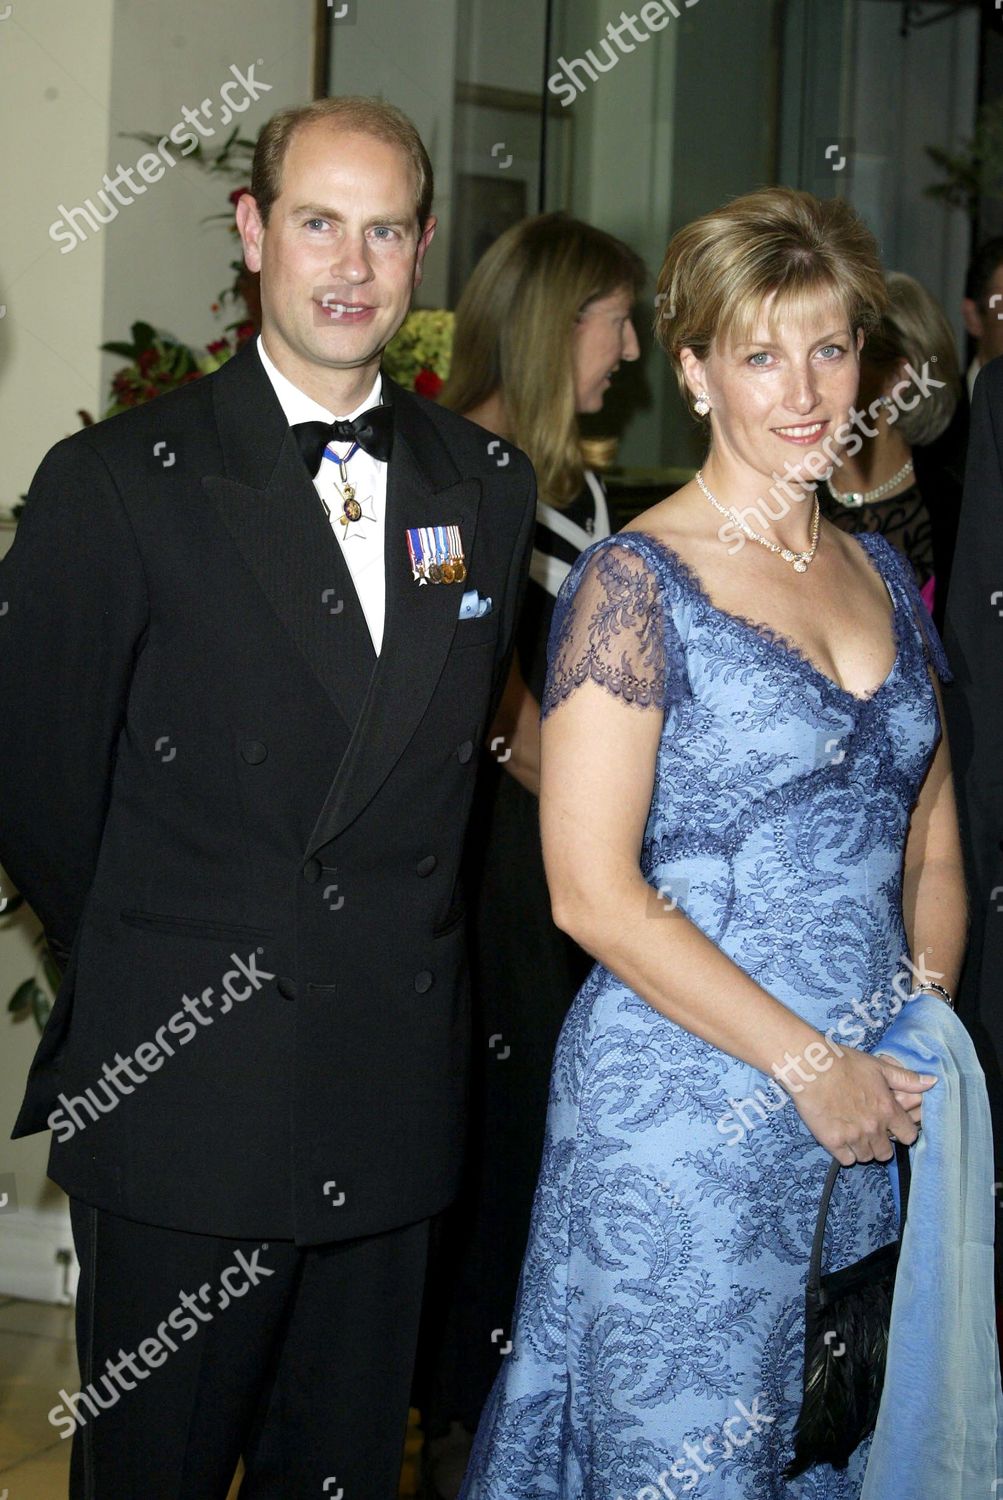 prince-edward-and-sophie-countess-of-wessex-state-dinner-at-hotel-l-horizon-st-brelades-jersey-britain-shutterstock-editorial-391062e.jpg